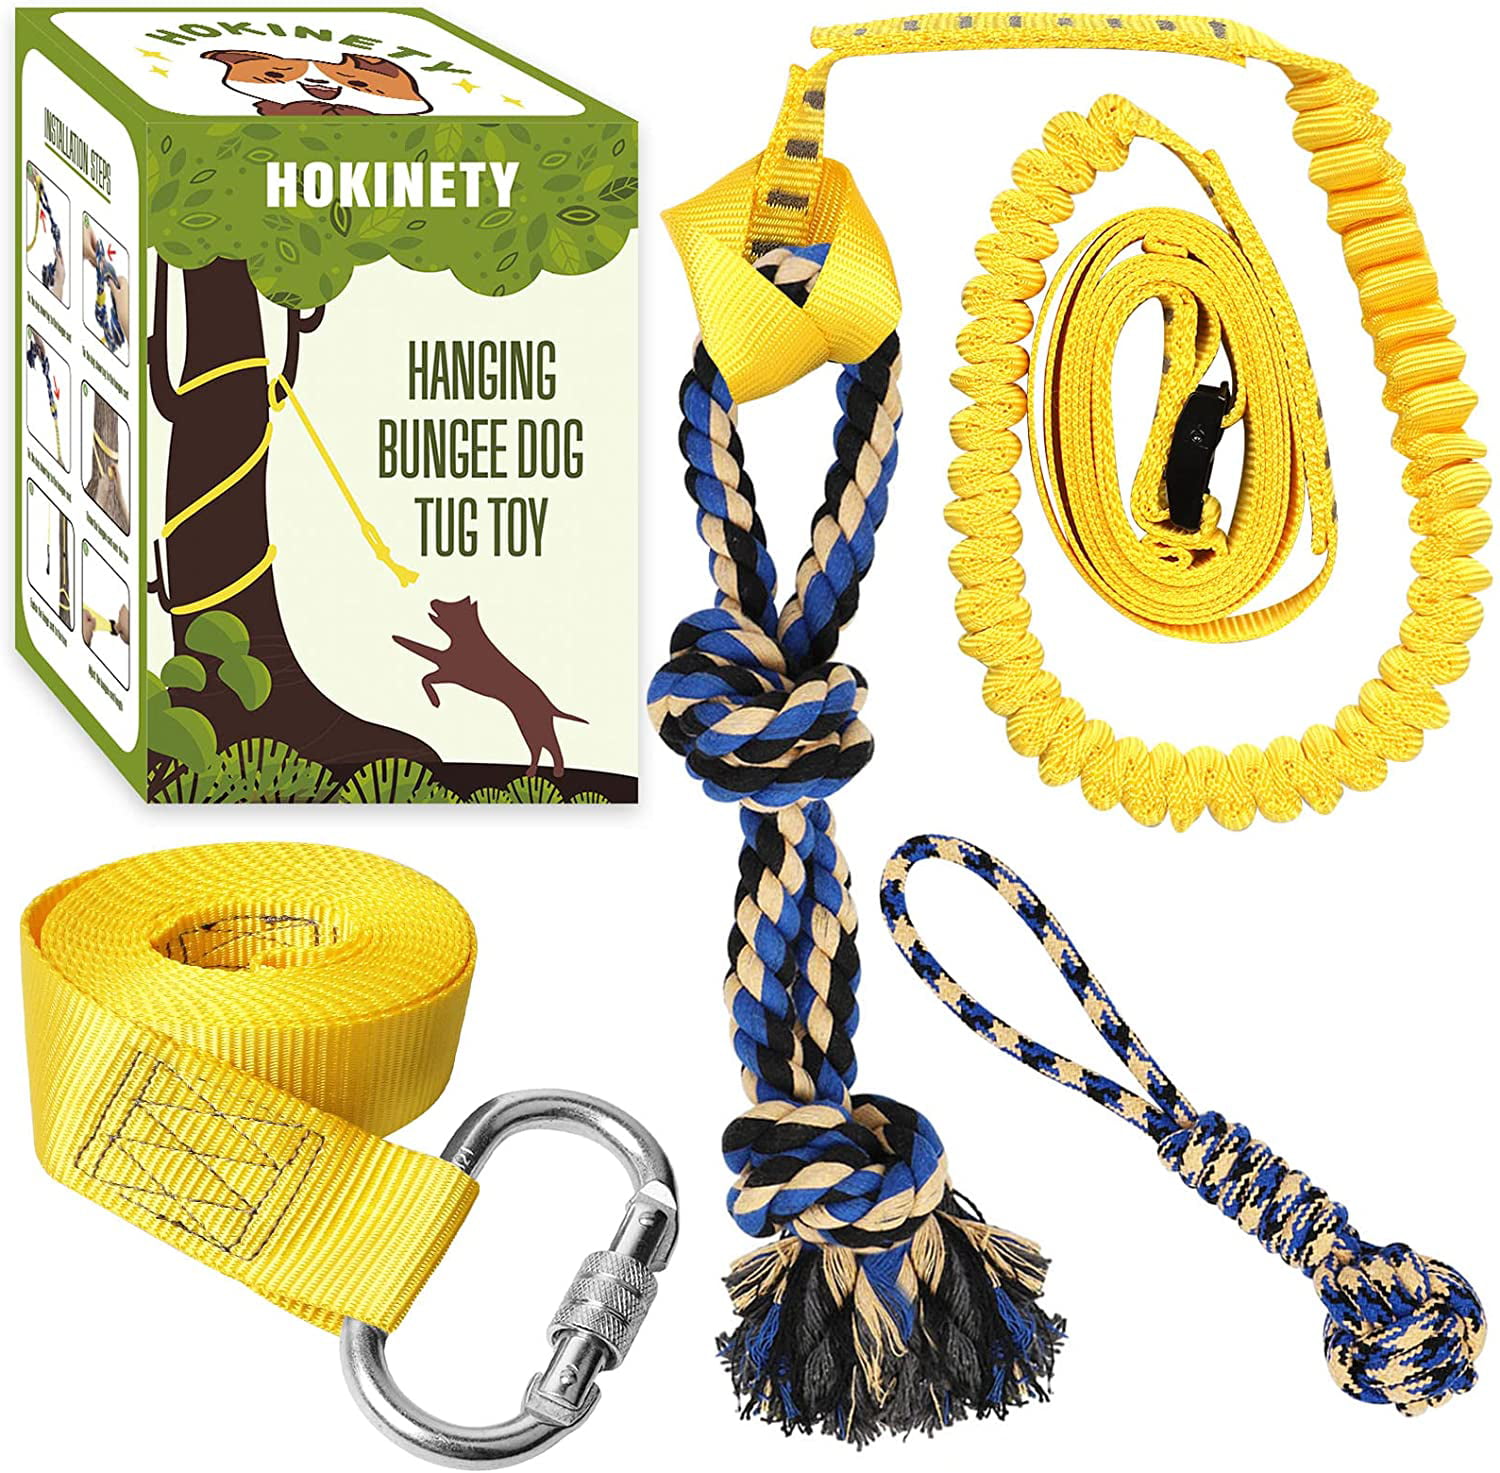 Outdoor Hanging Bungee Dog Tug Toy,Interactive Tug-of-War Game for Pitbull & Small to Large Dogs,Durable Tugger to Exercise and Fun Solo Play with a Indestructible Rope Chew Toy 